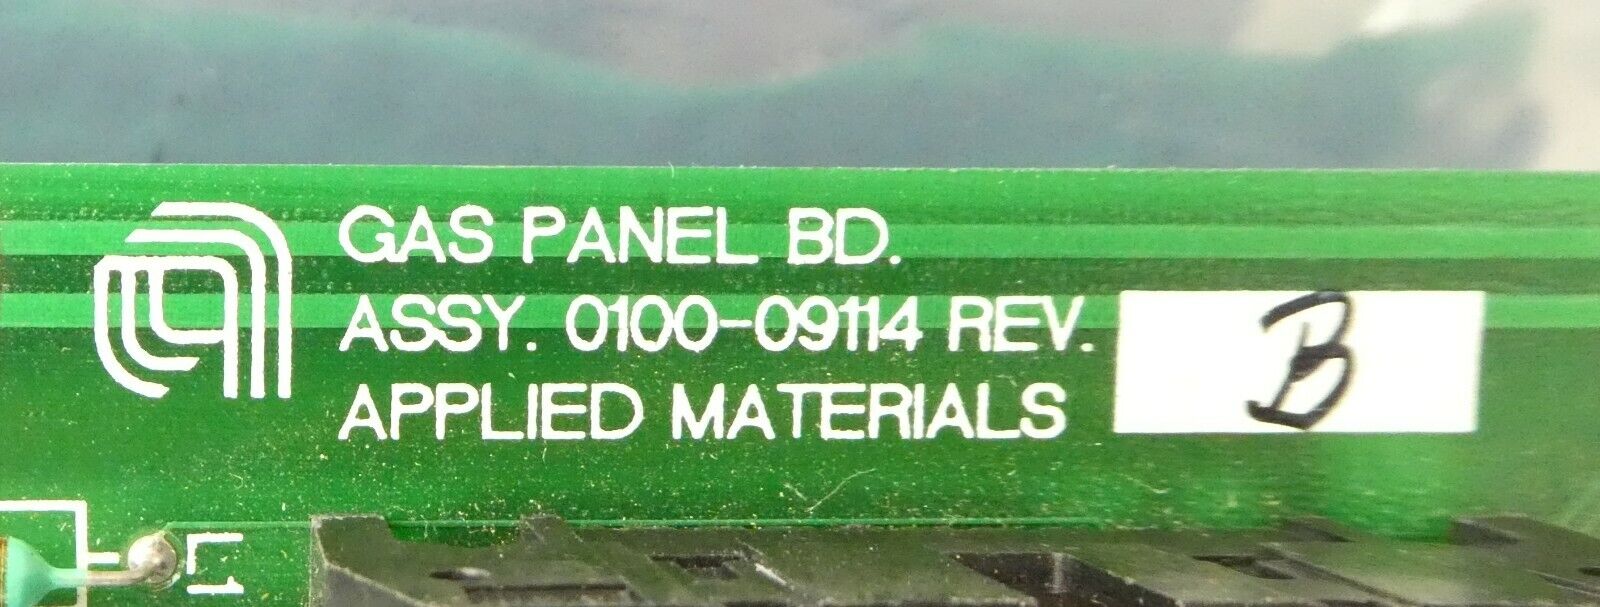 AMAT Applied Materials 0100-09114 Gas Panel Board PCB Rev. B P5000 Working